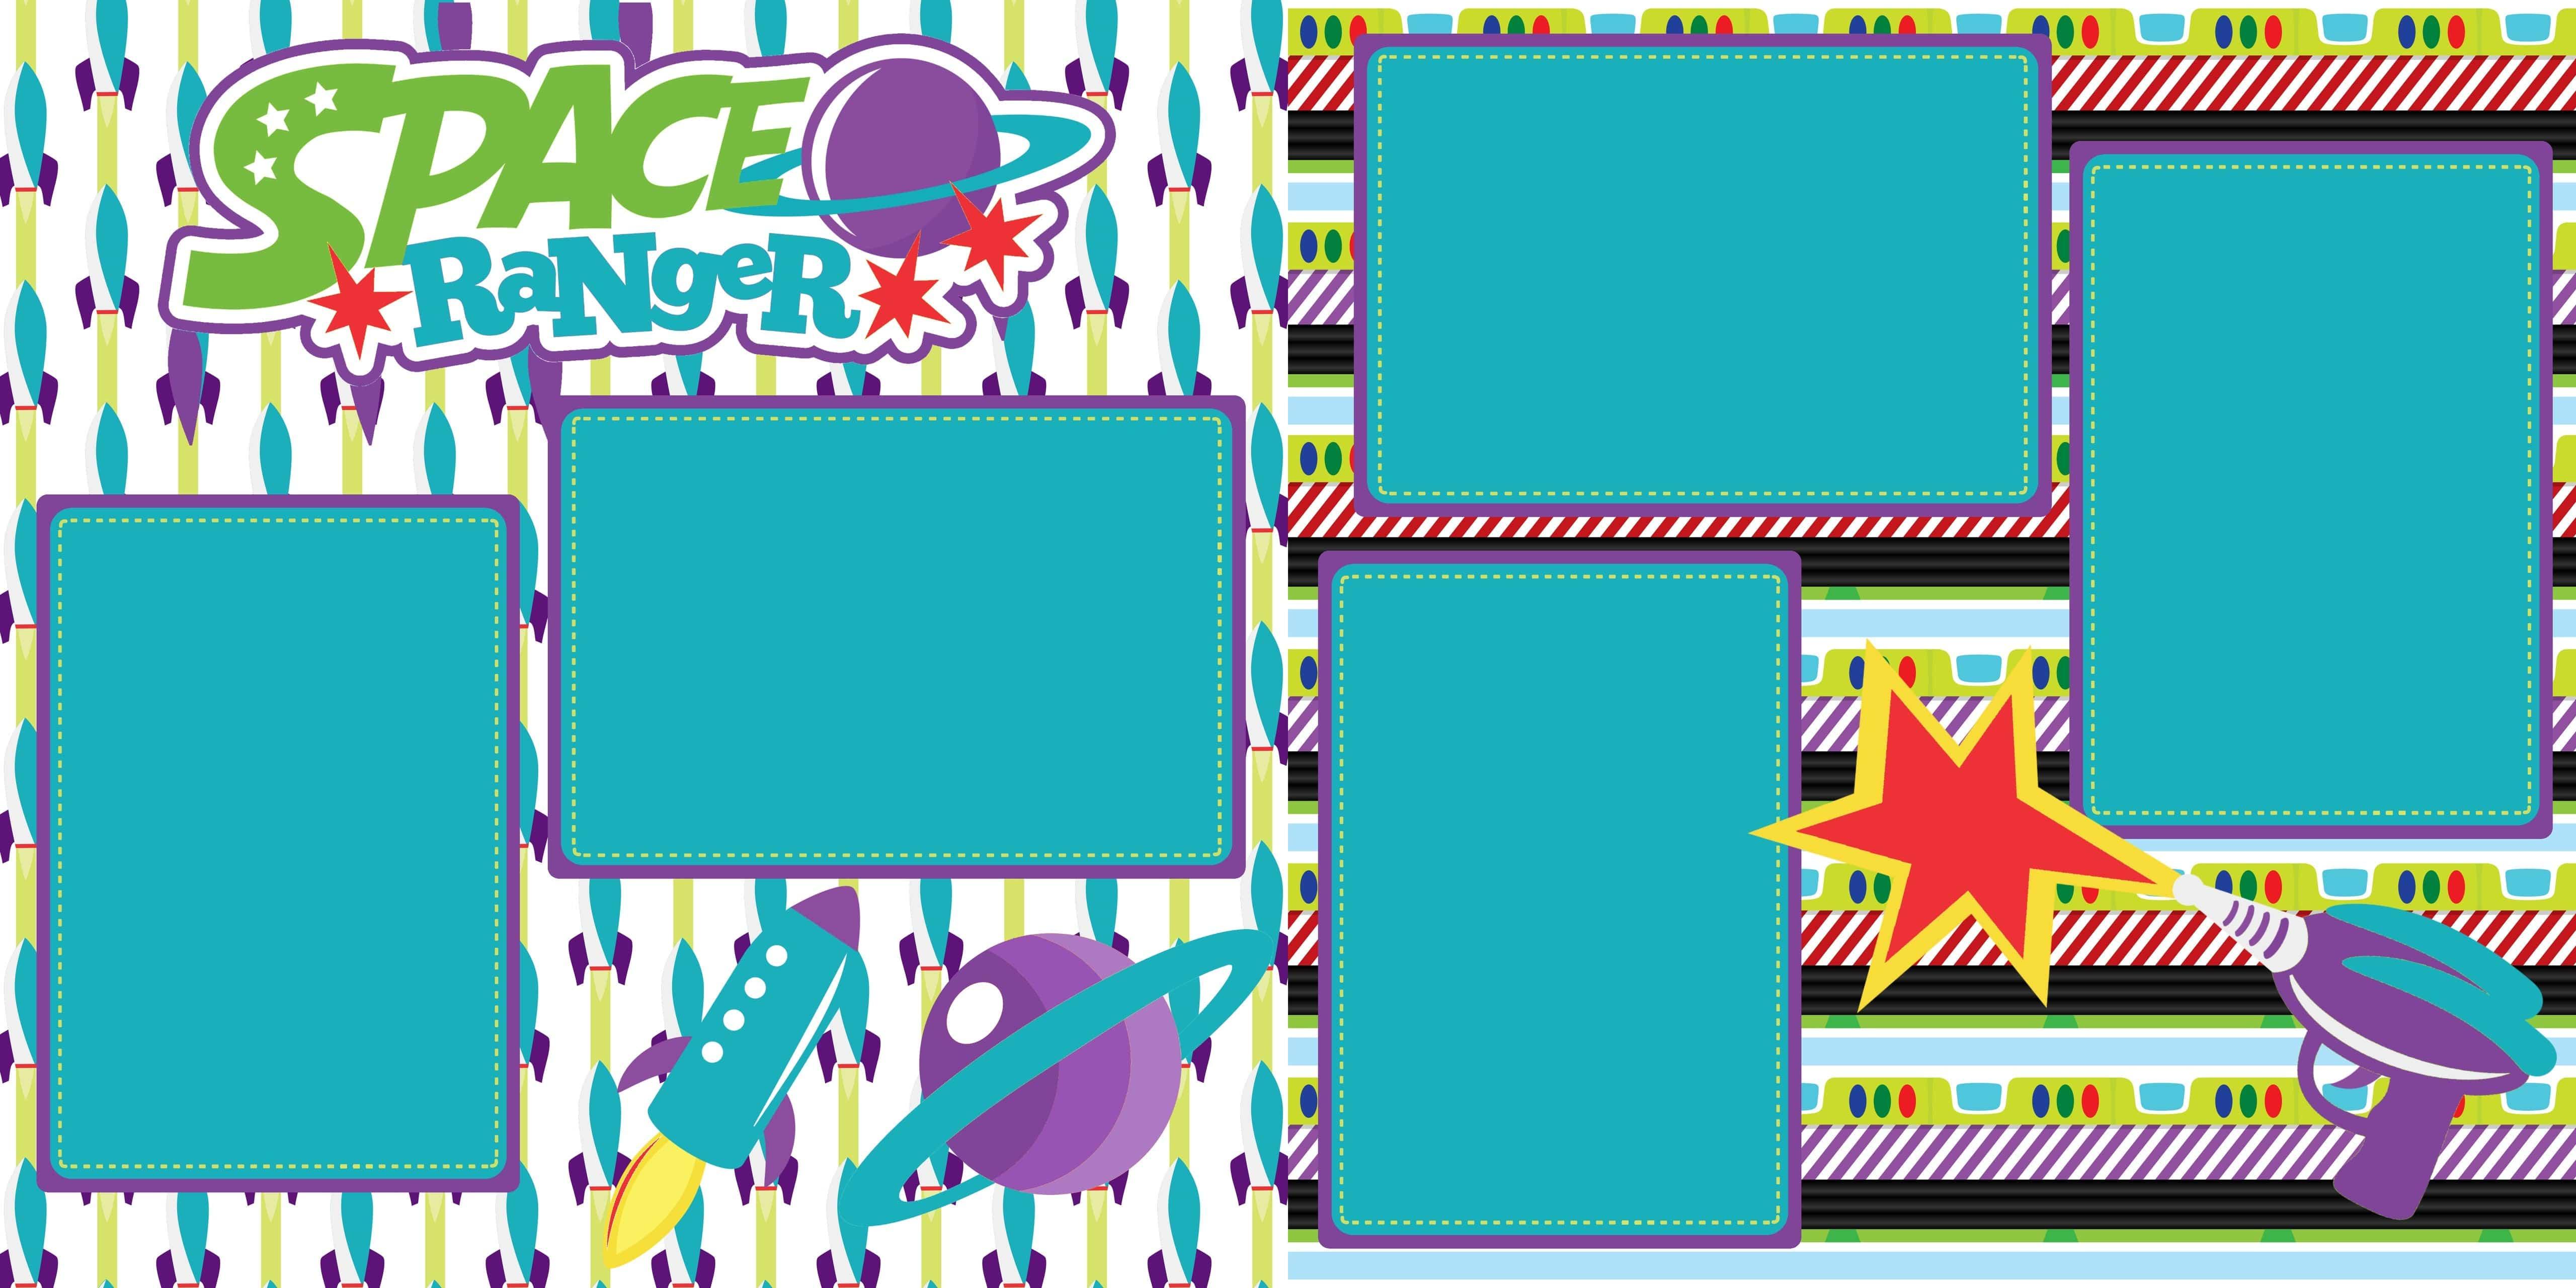 Toy Box Collection Space Ranger (2) - 12 x 12 Premade, Printed Scrapbook Pages by SSC Designs